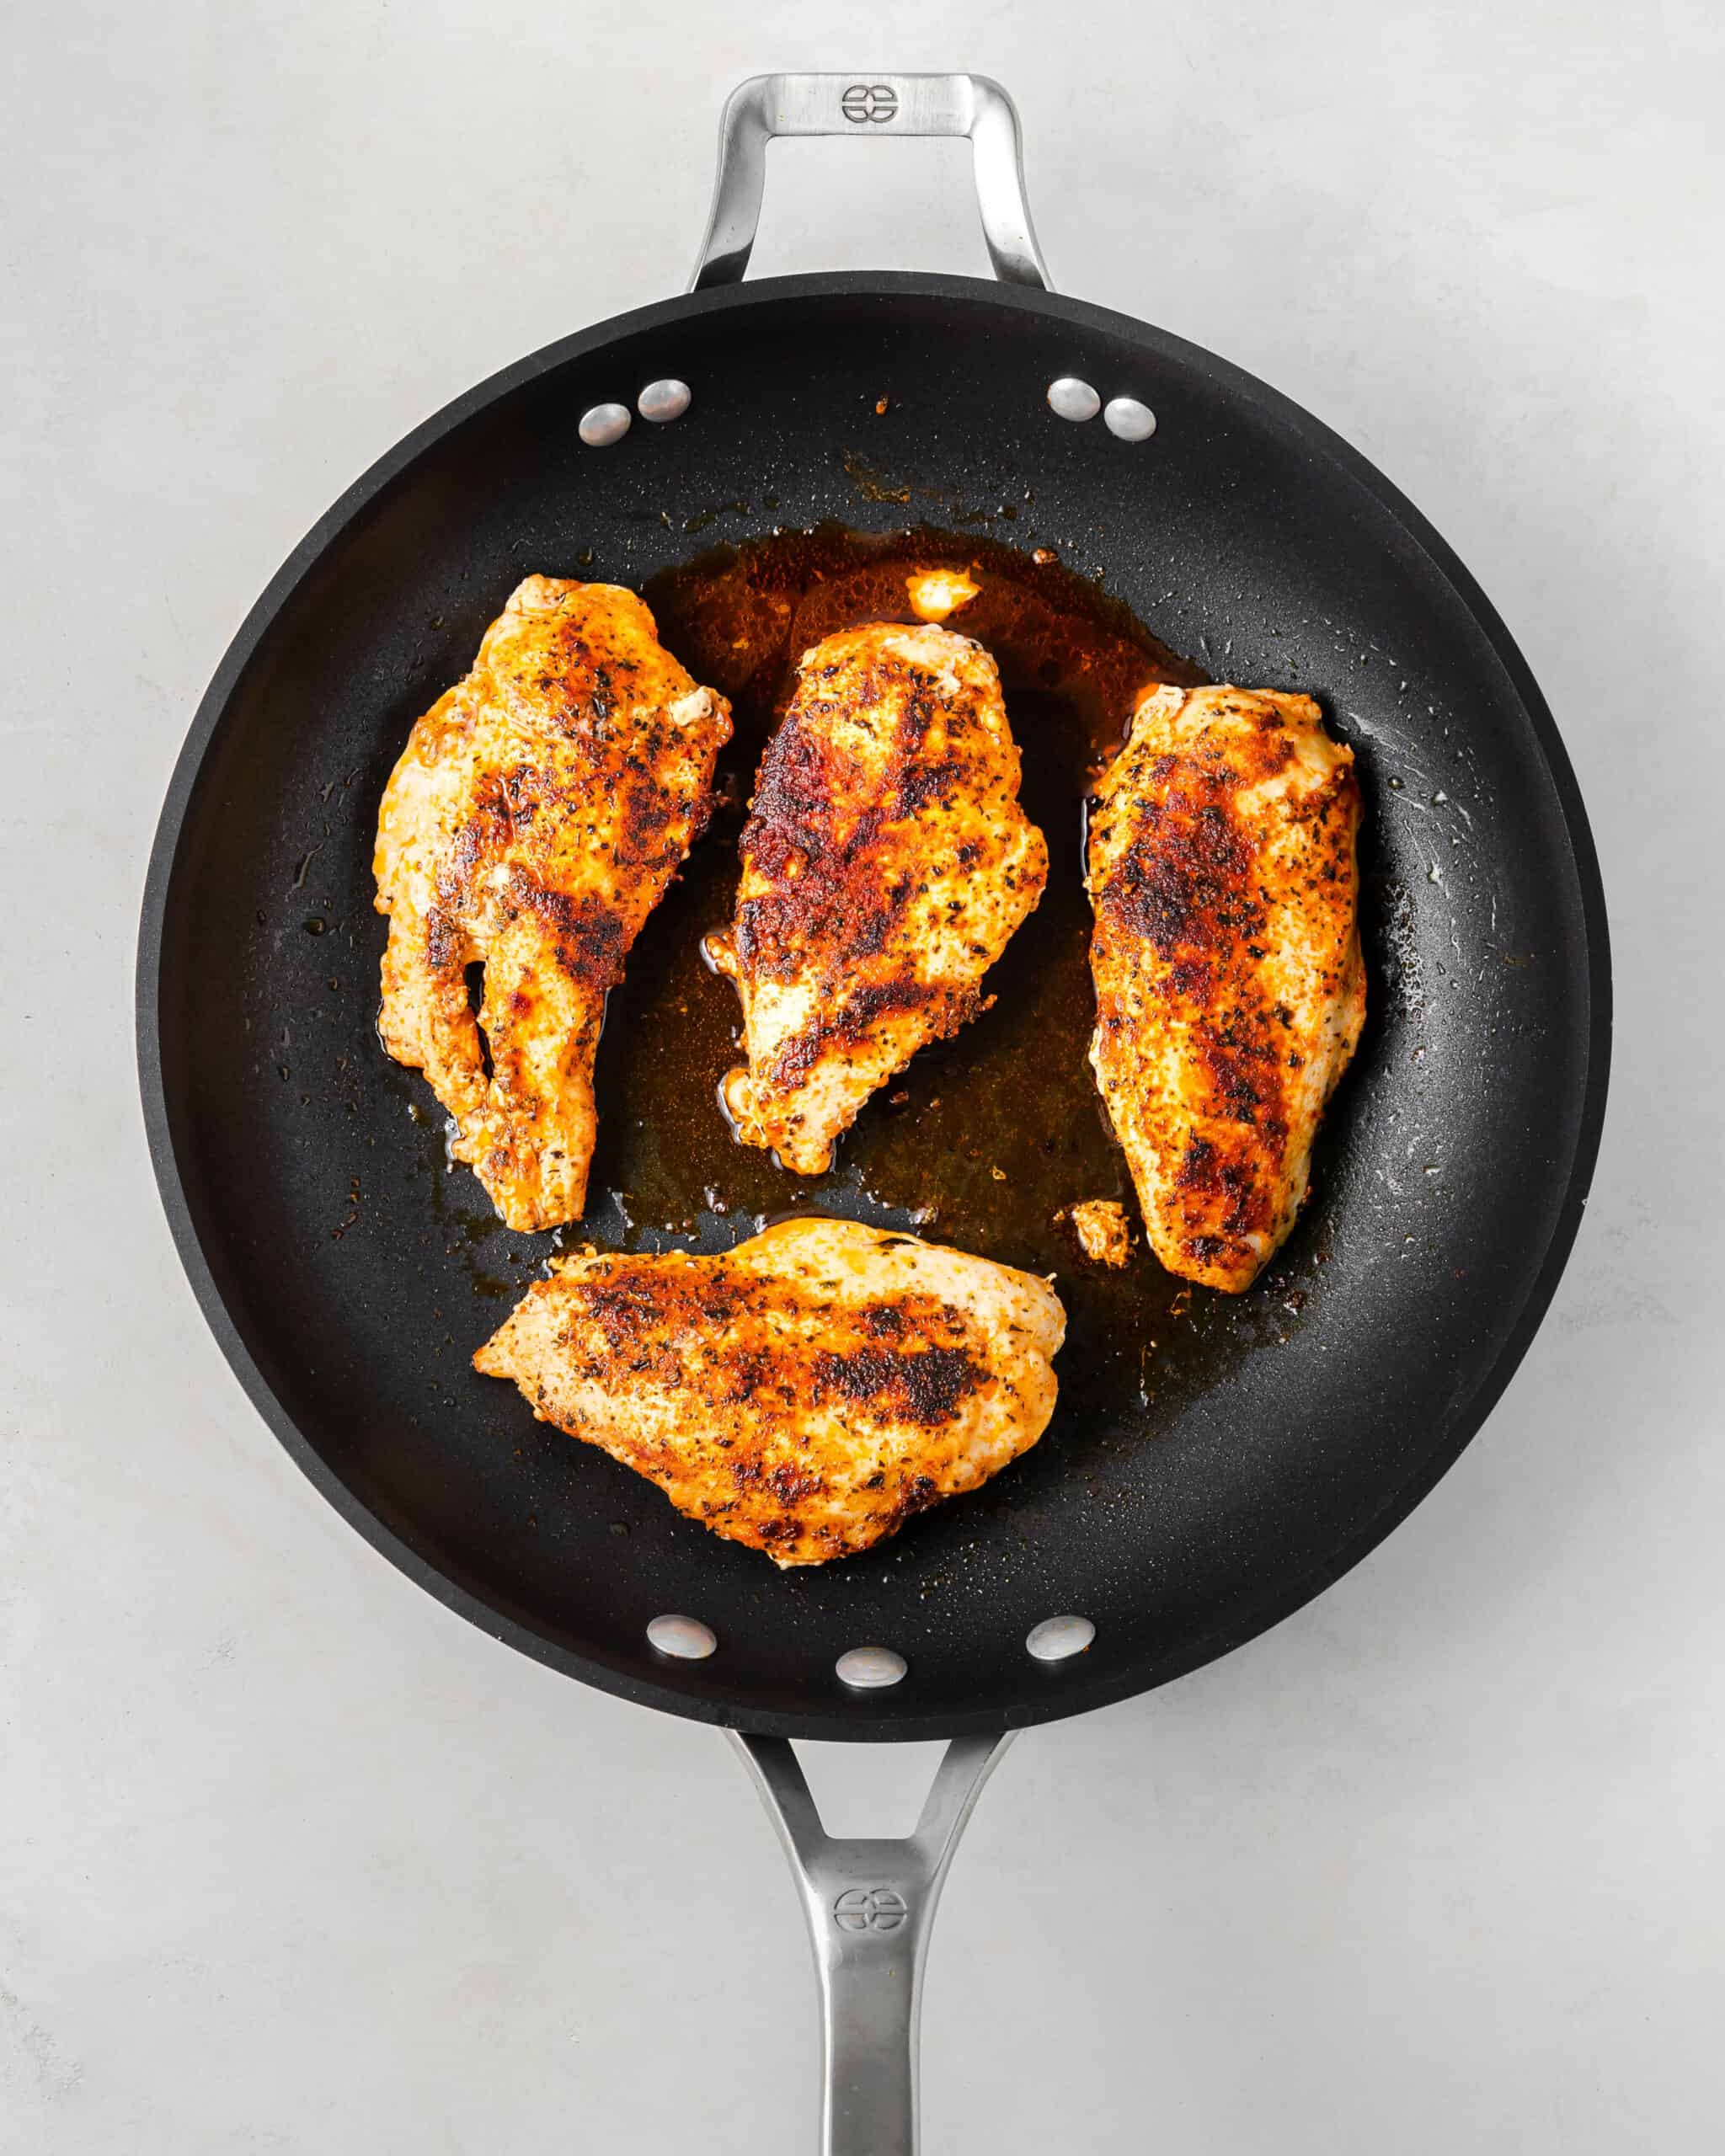 Cooked Chicken in a pan.